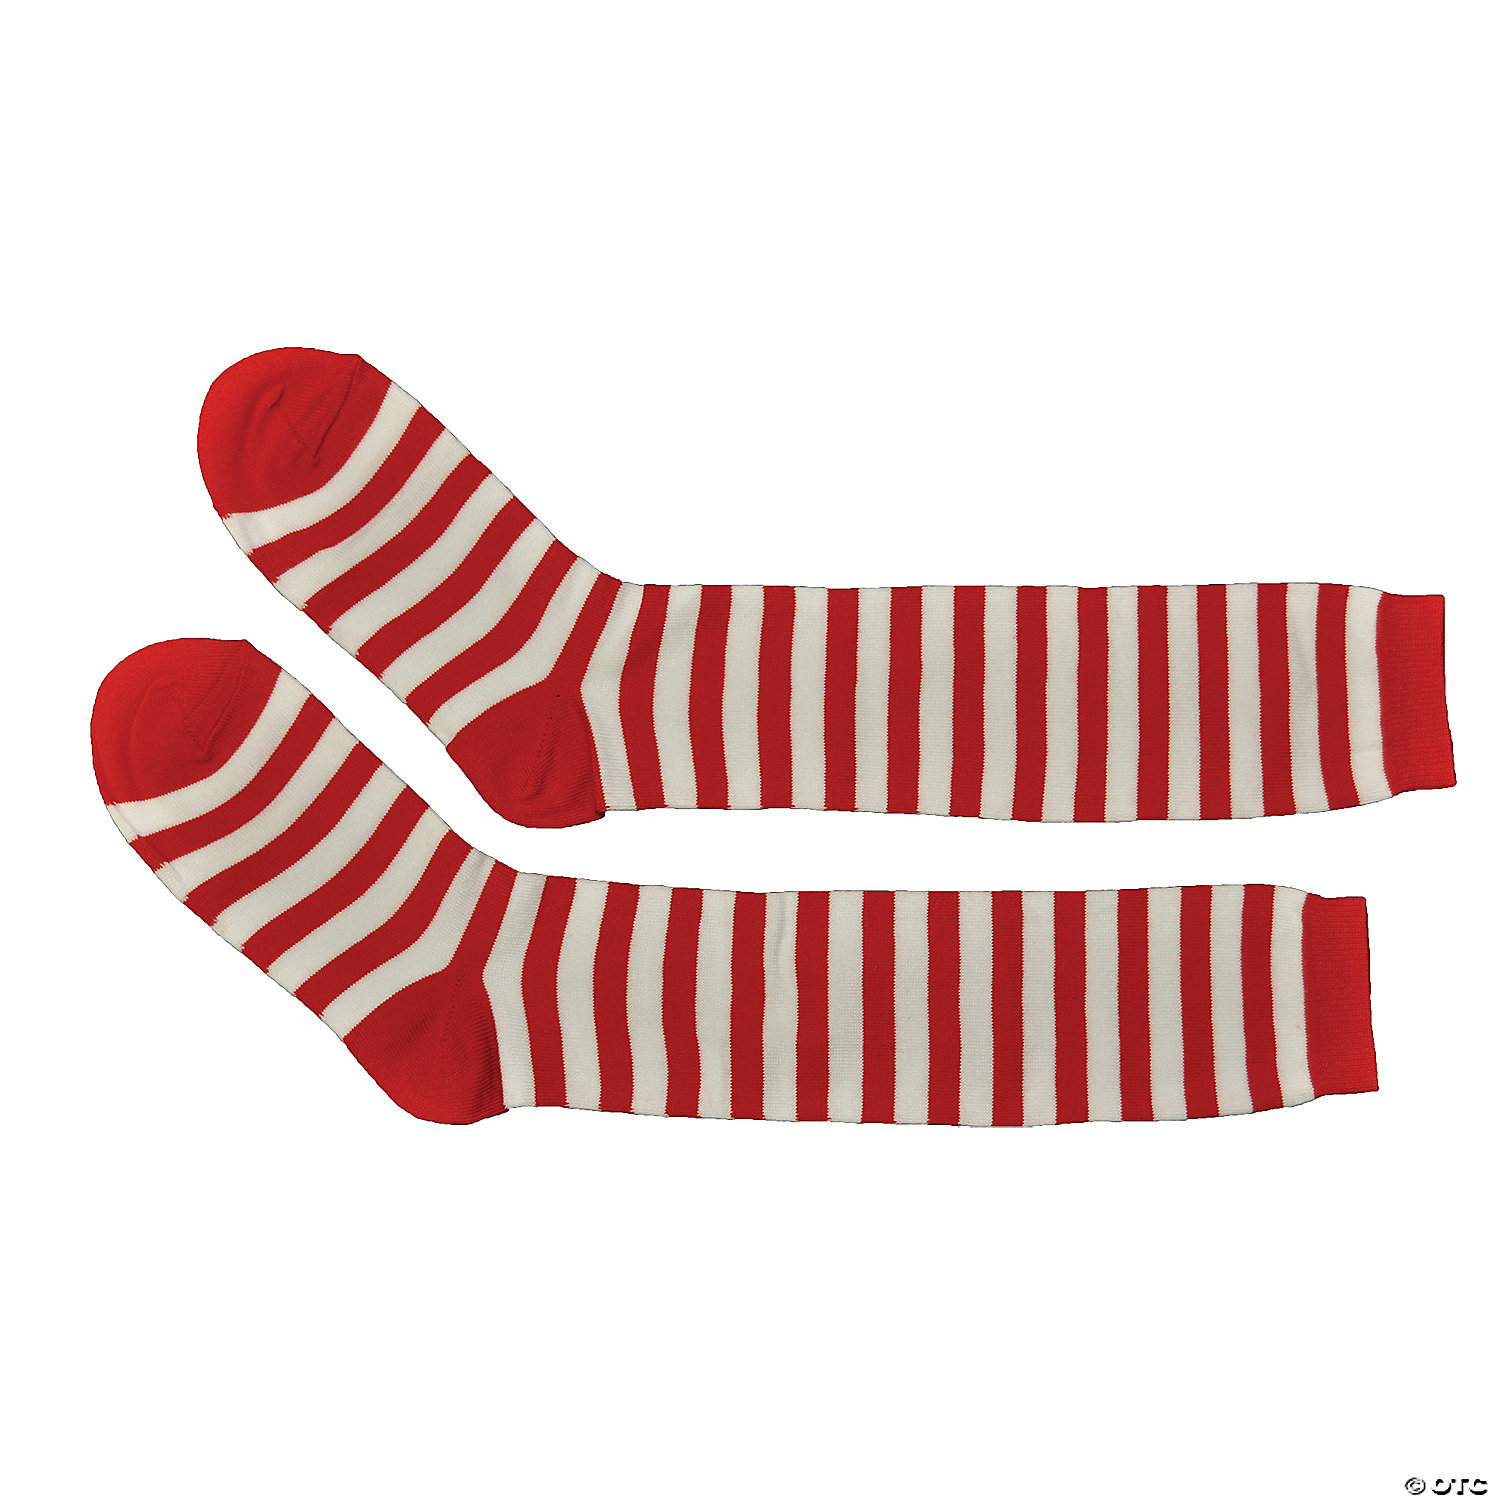 RED AND WHITE STRIPED SOCKS - CHRISTMAS